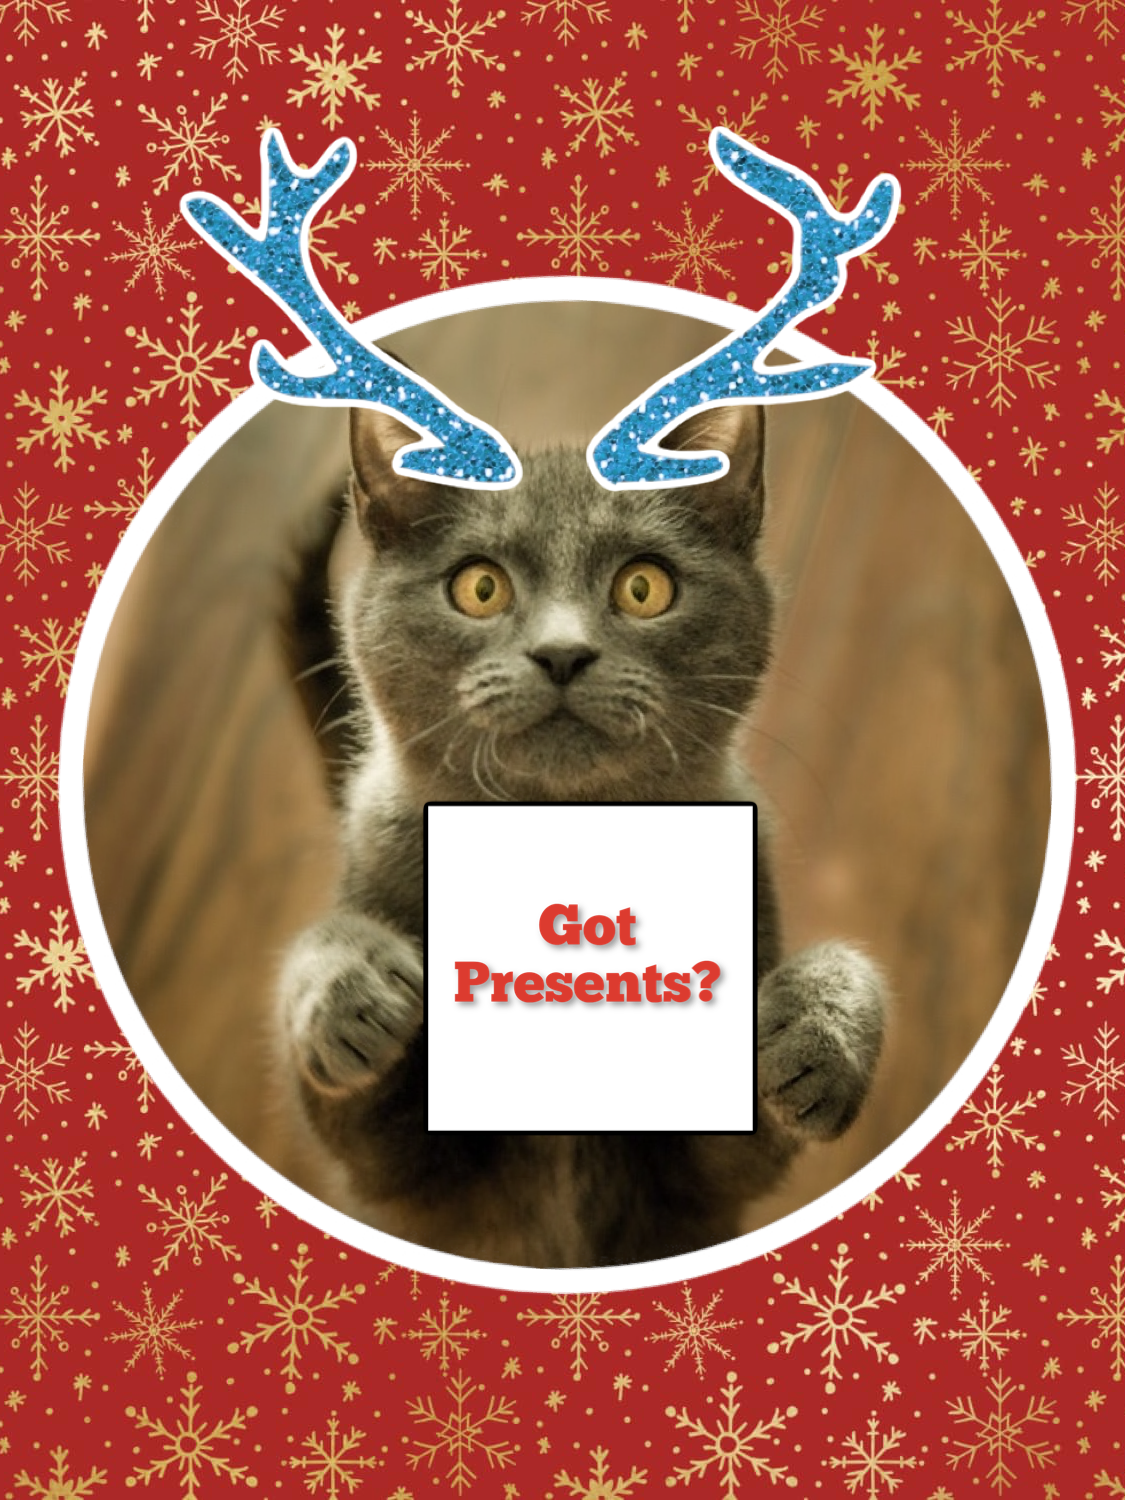 Got Presents? A Picture Of A Cat With Antlers On Its Head Template